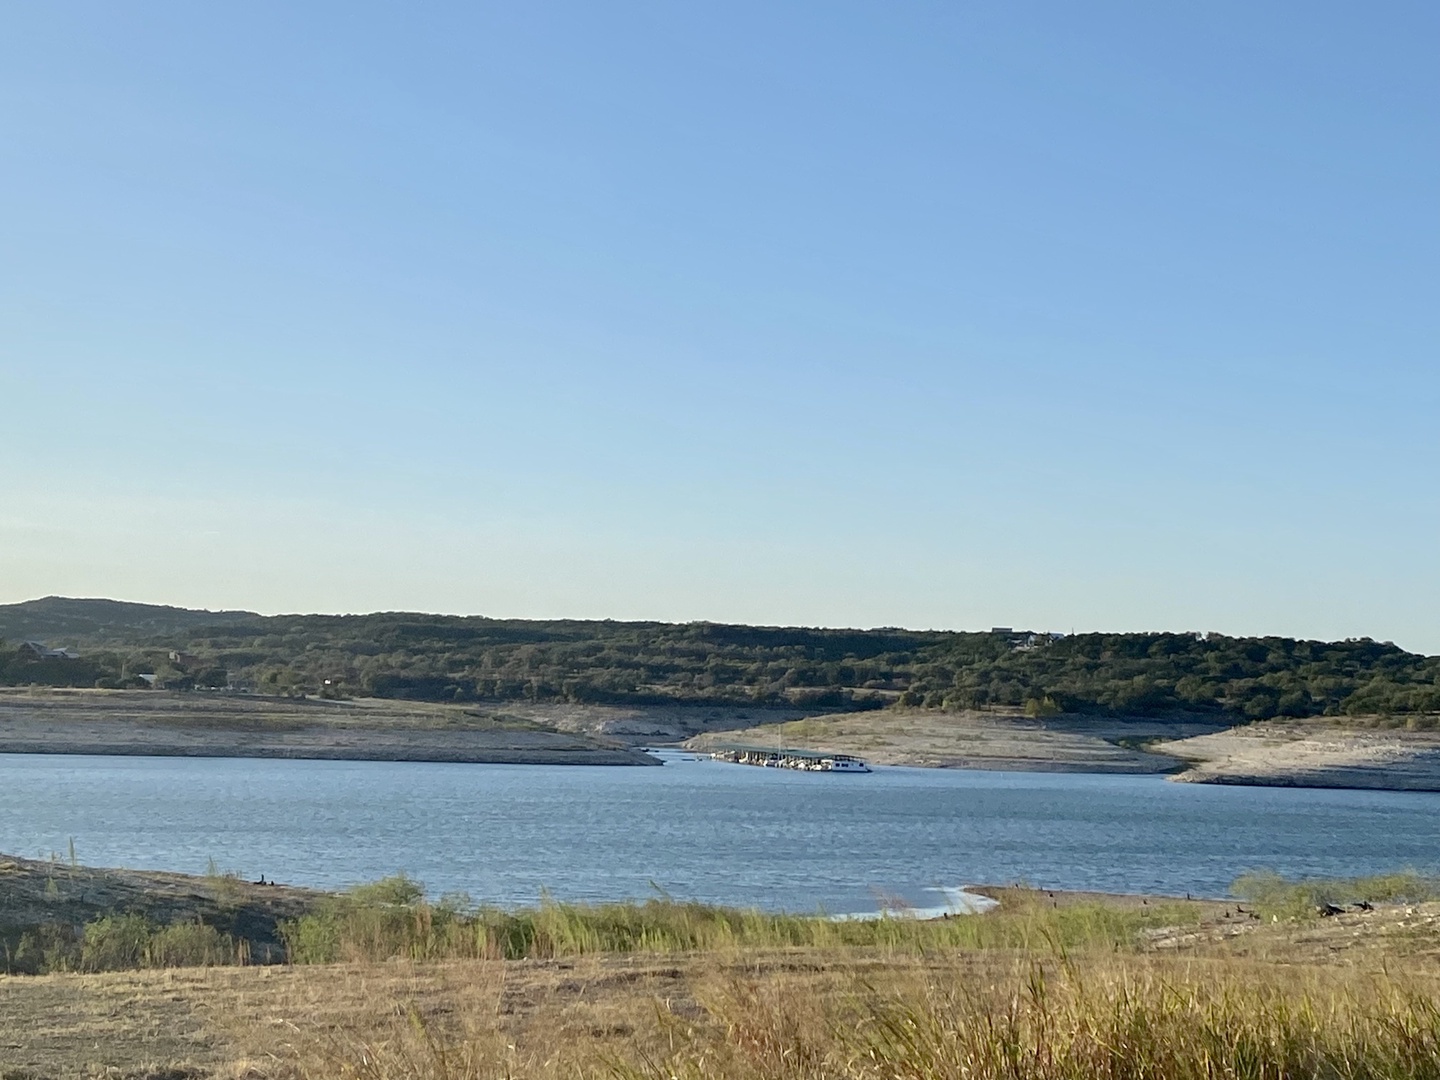 Lake Travis offers endless fun with boating, water skiing, wakeboarding, kayaking, paddle boarding, and fishing!